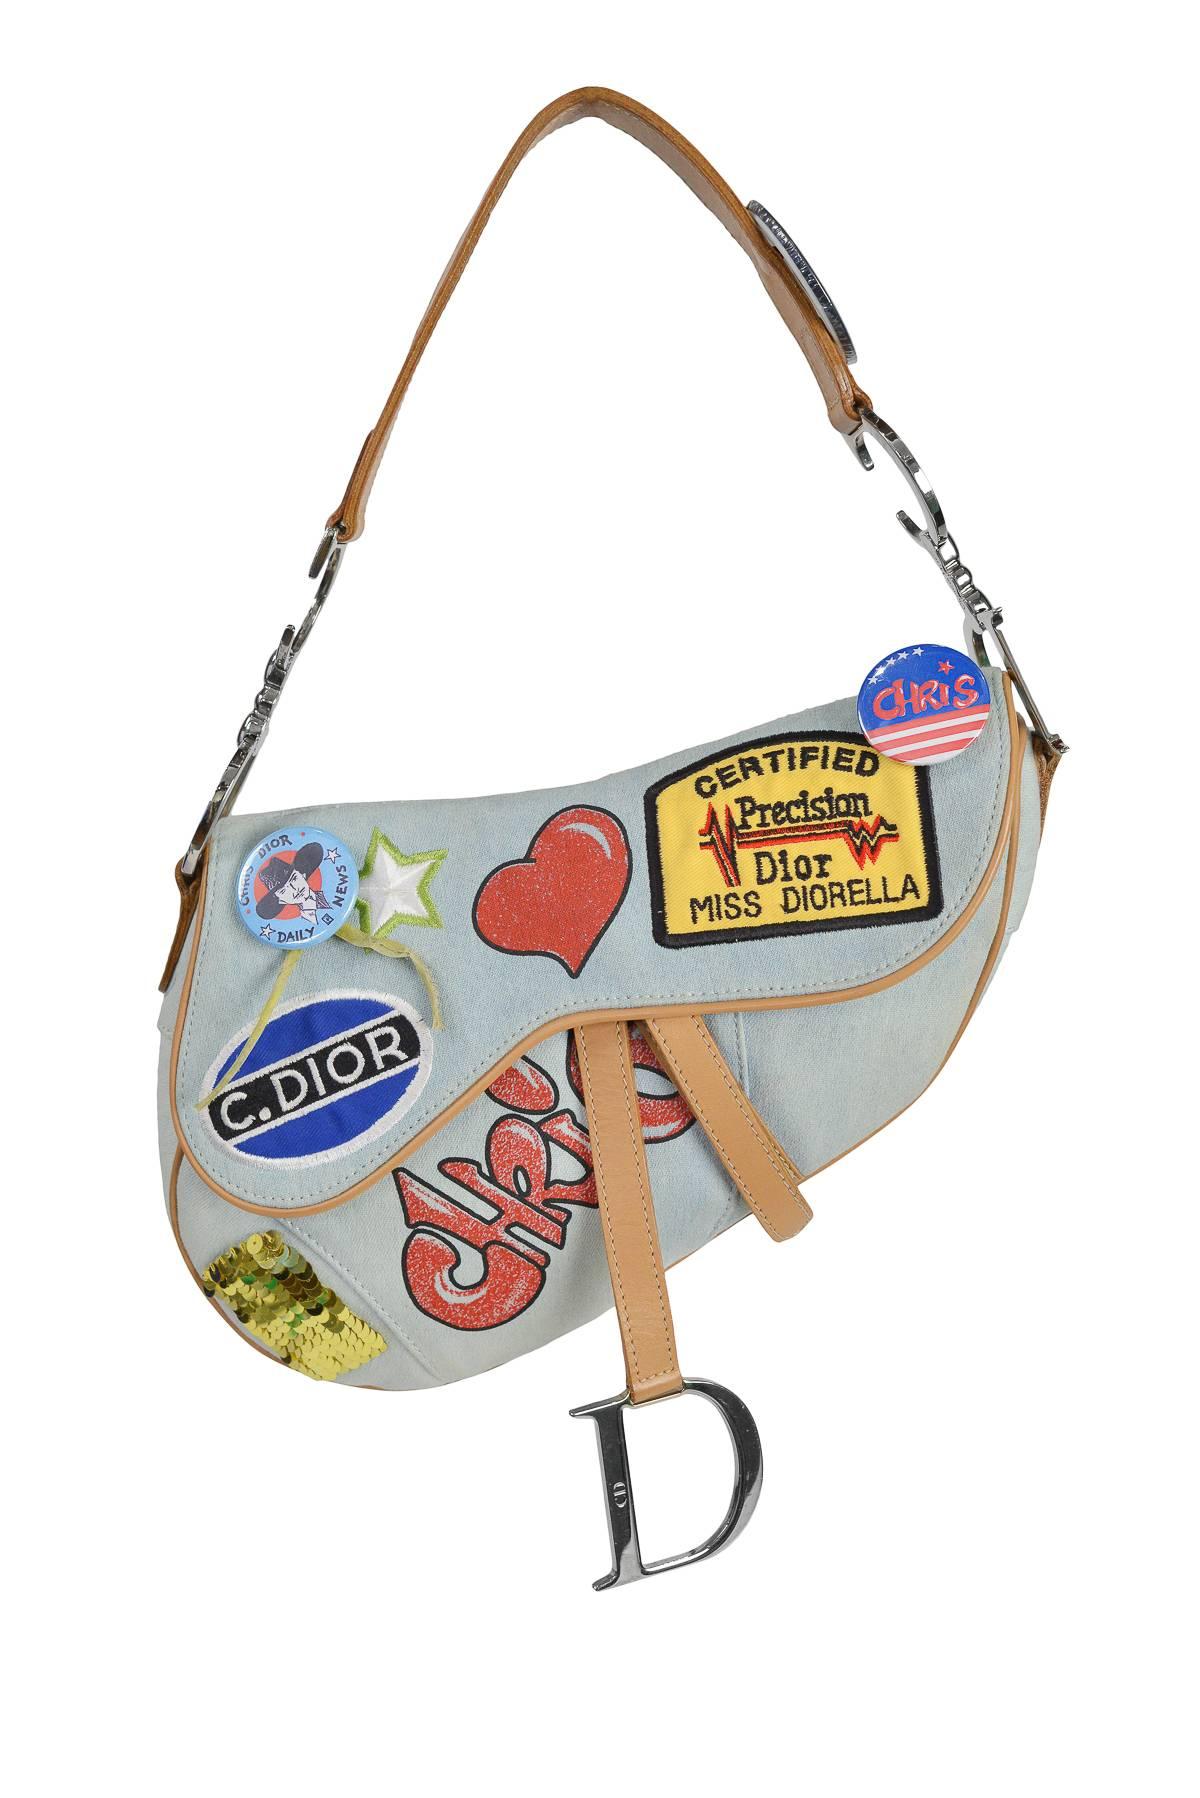 Iconic John Galliano for Christian Dior light denim 'Speedway' Saddle bag with decorative pins, patches & graffiti detail. Limited edition.

